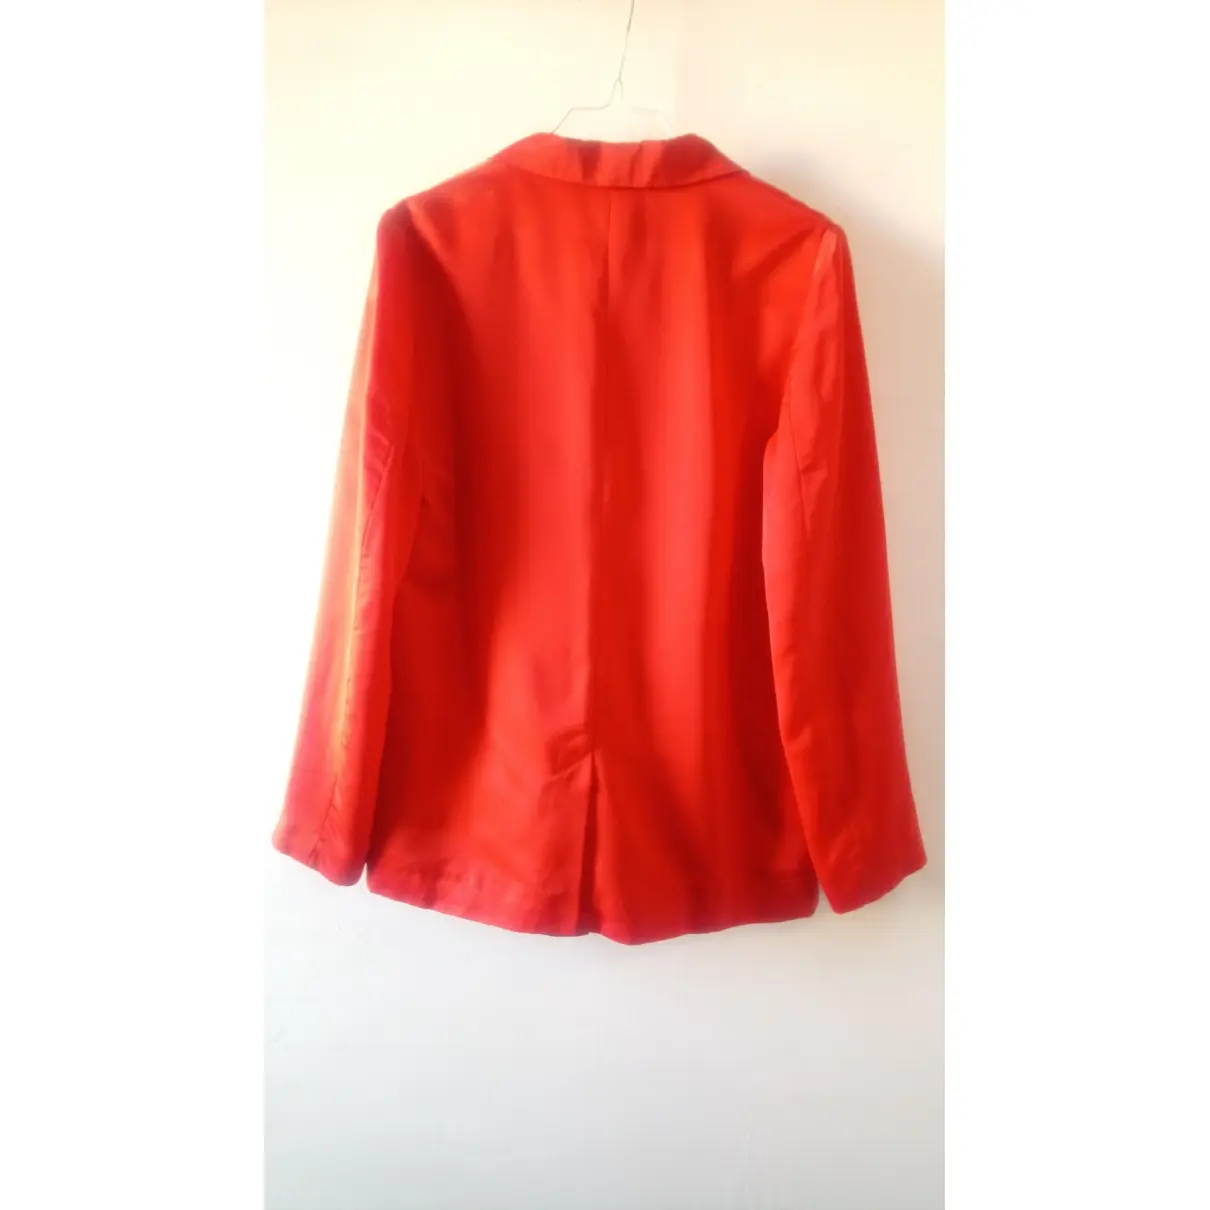 H&M Conscious Exclusive Orange Polyester Jacket for sale